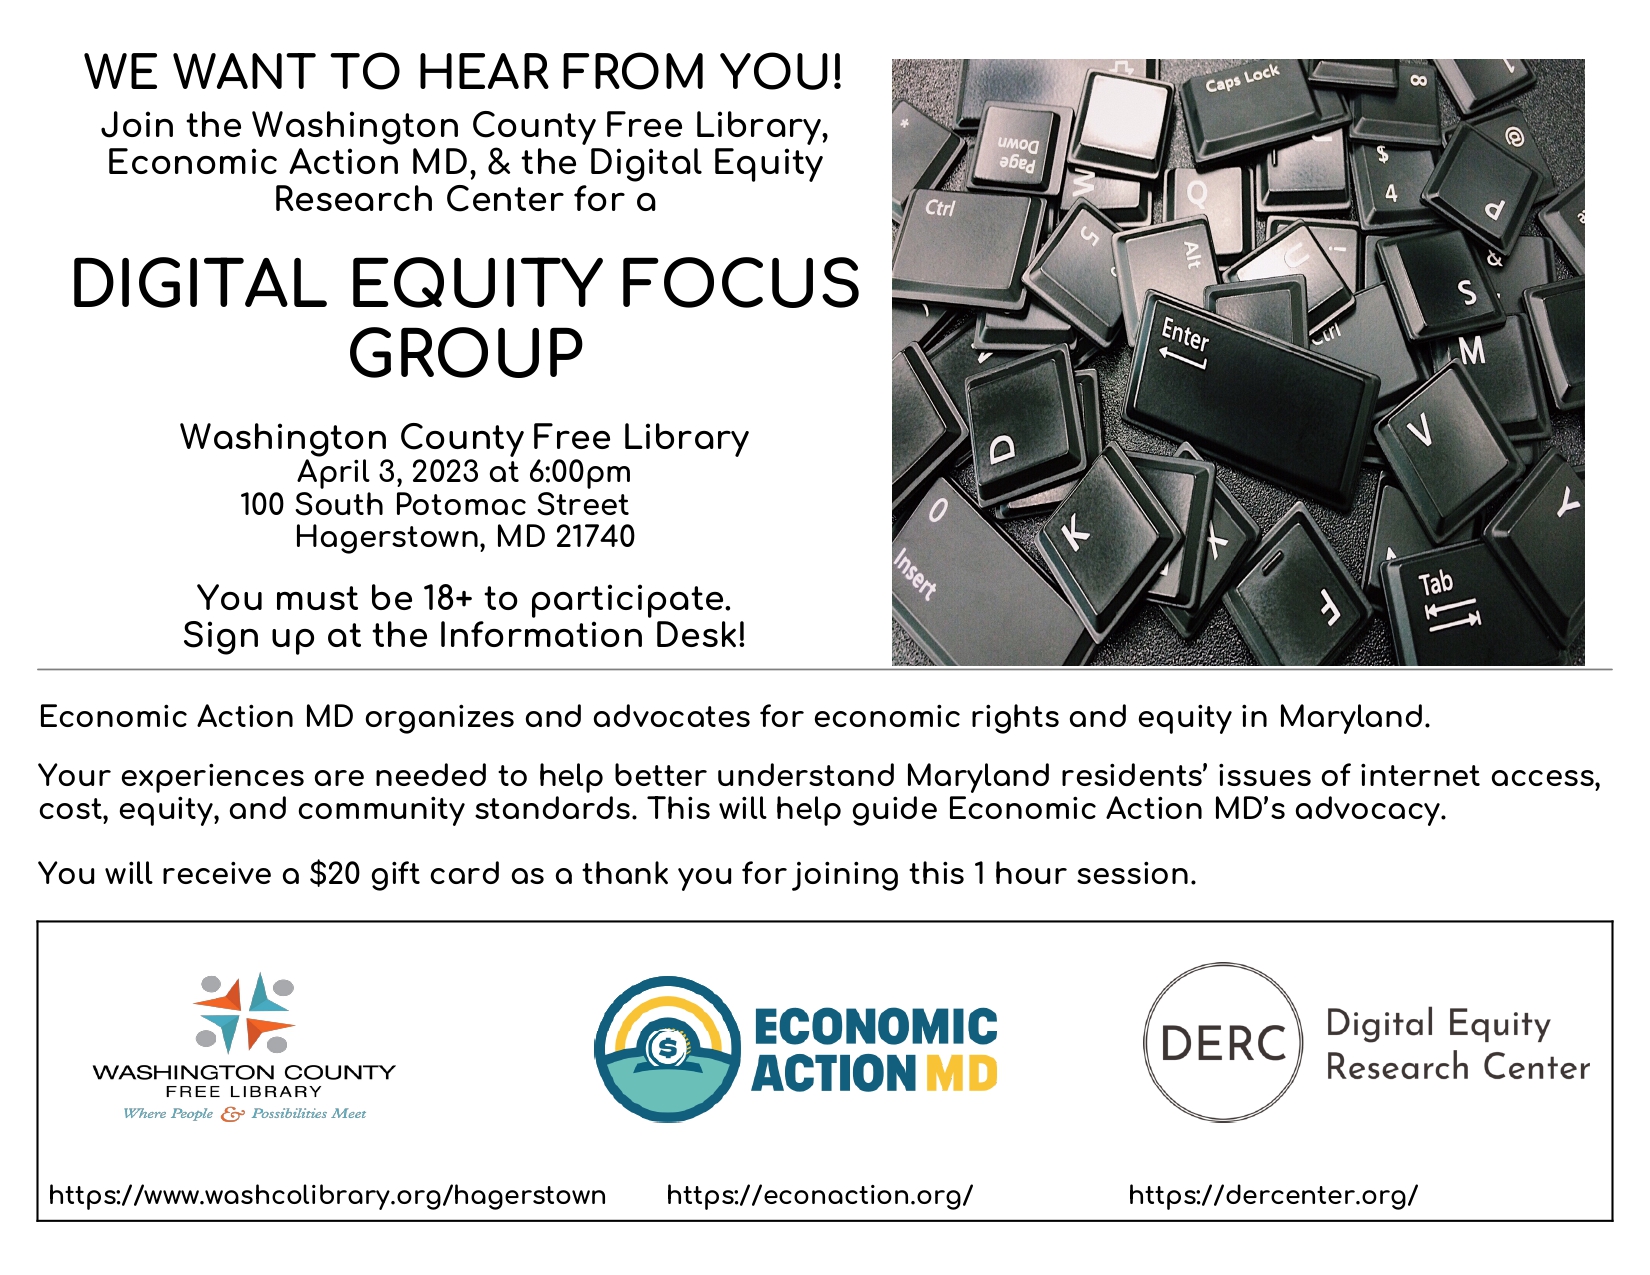 Digital Equality Focus Group Recruitment Flyer